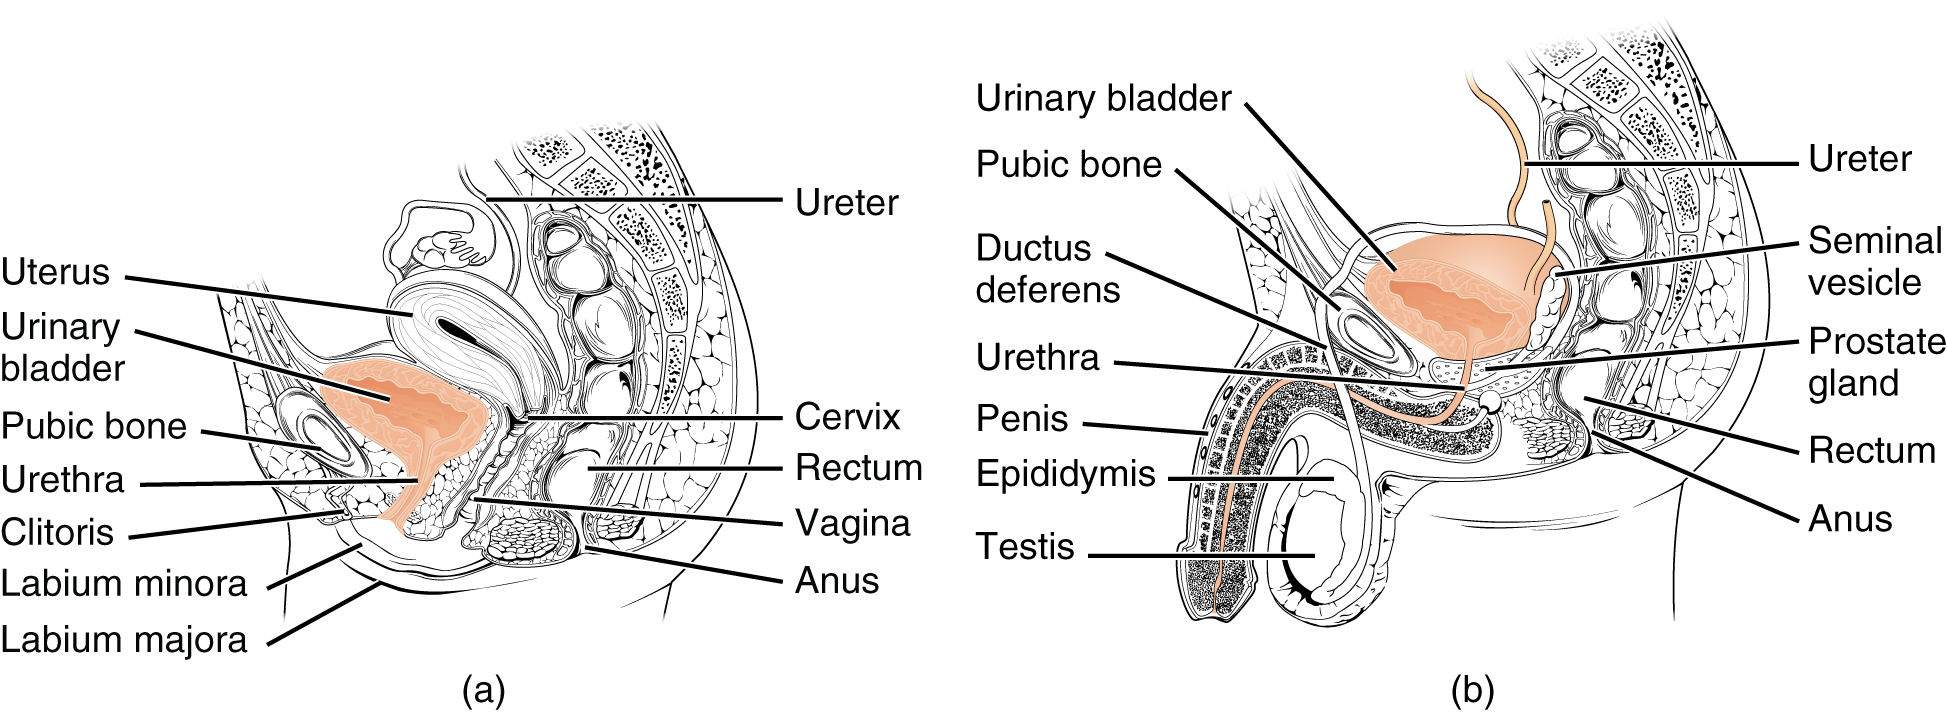 The top panel of this figure shows the organs in the female urinary system.